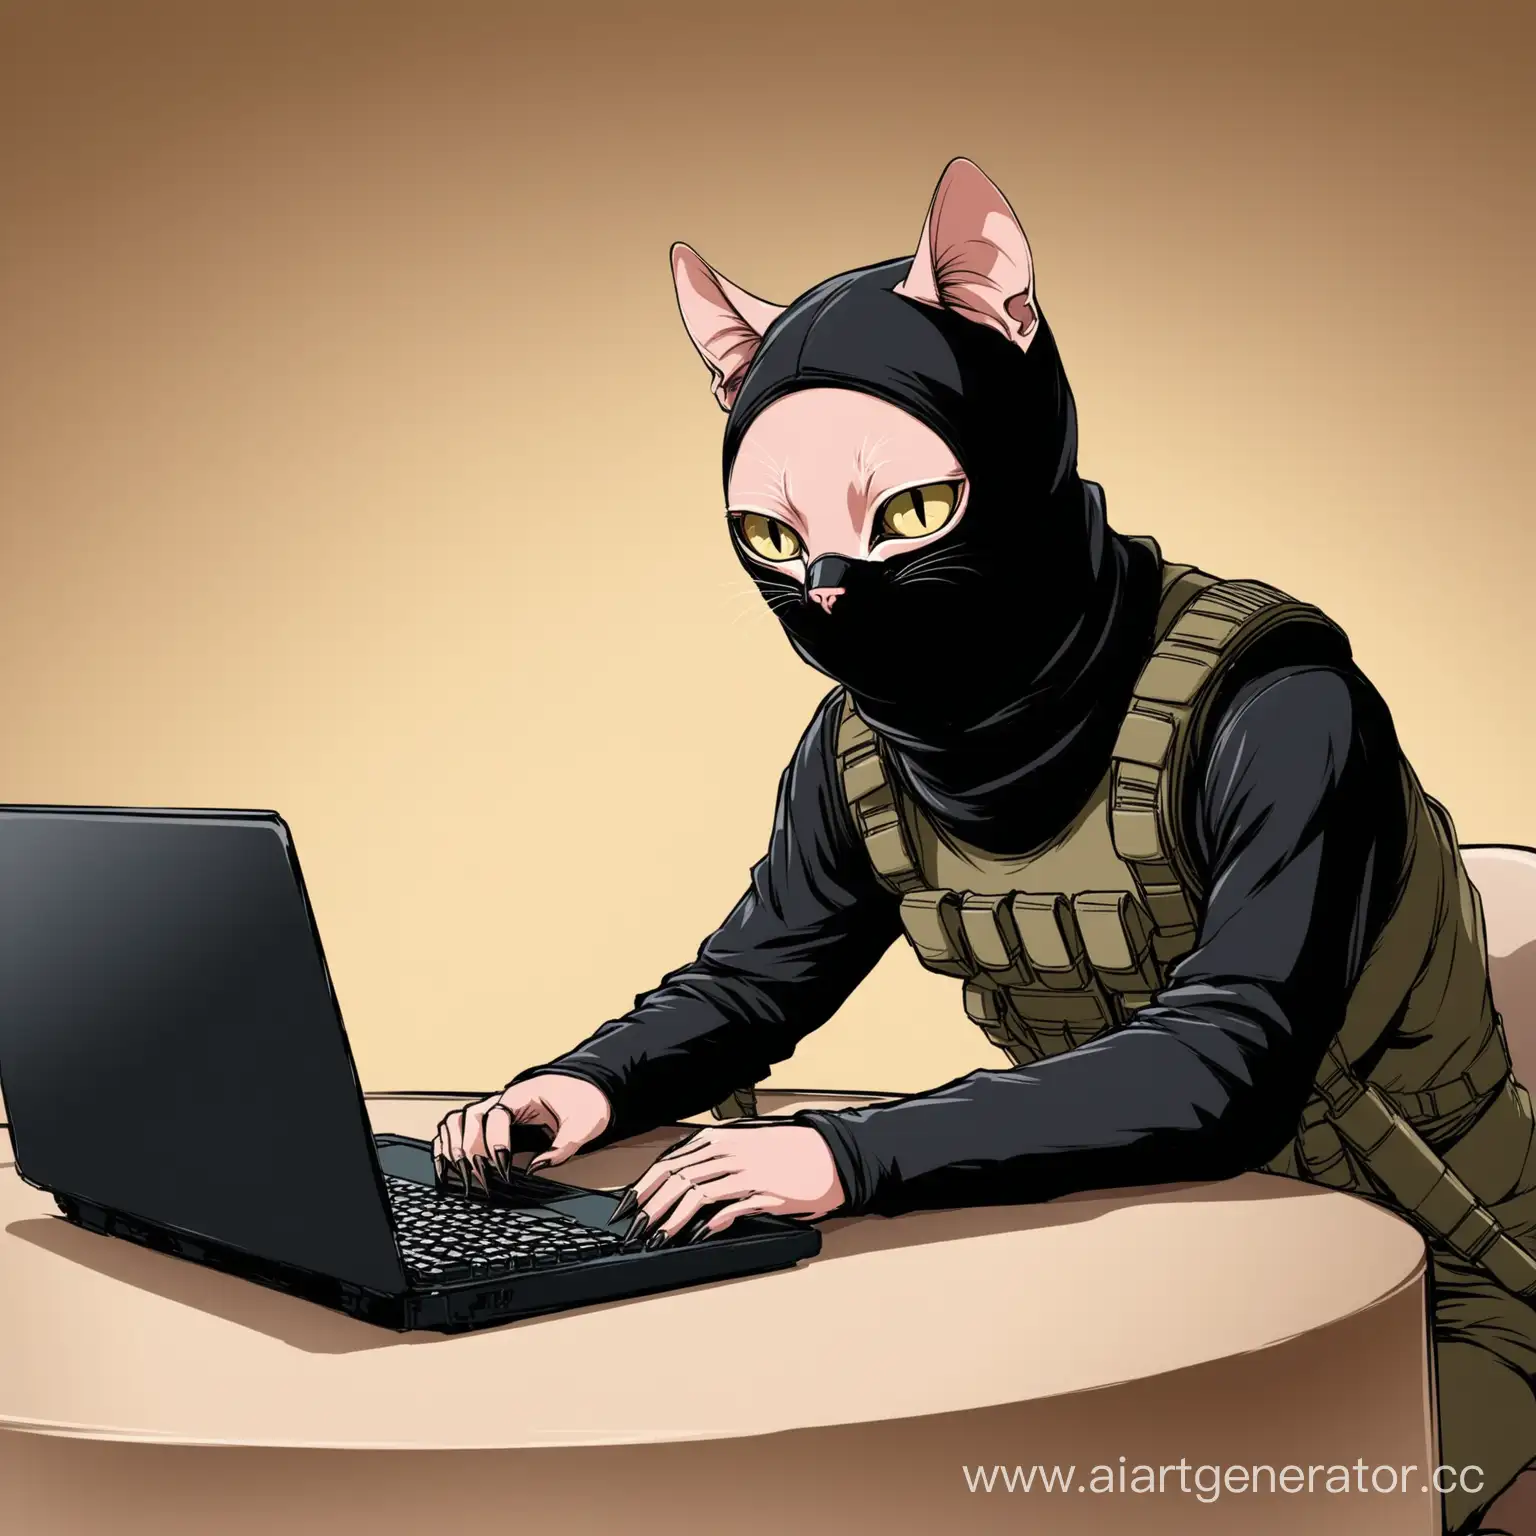 Sphinx-Cat-in-Balaclava-Engages-in-Counter-Strike-Gameplay